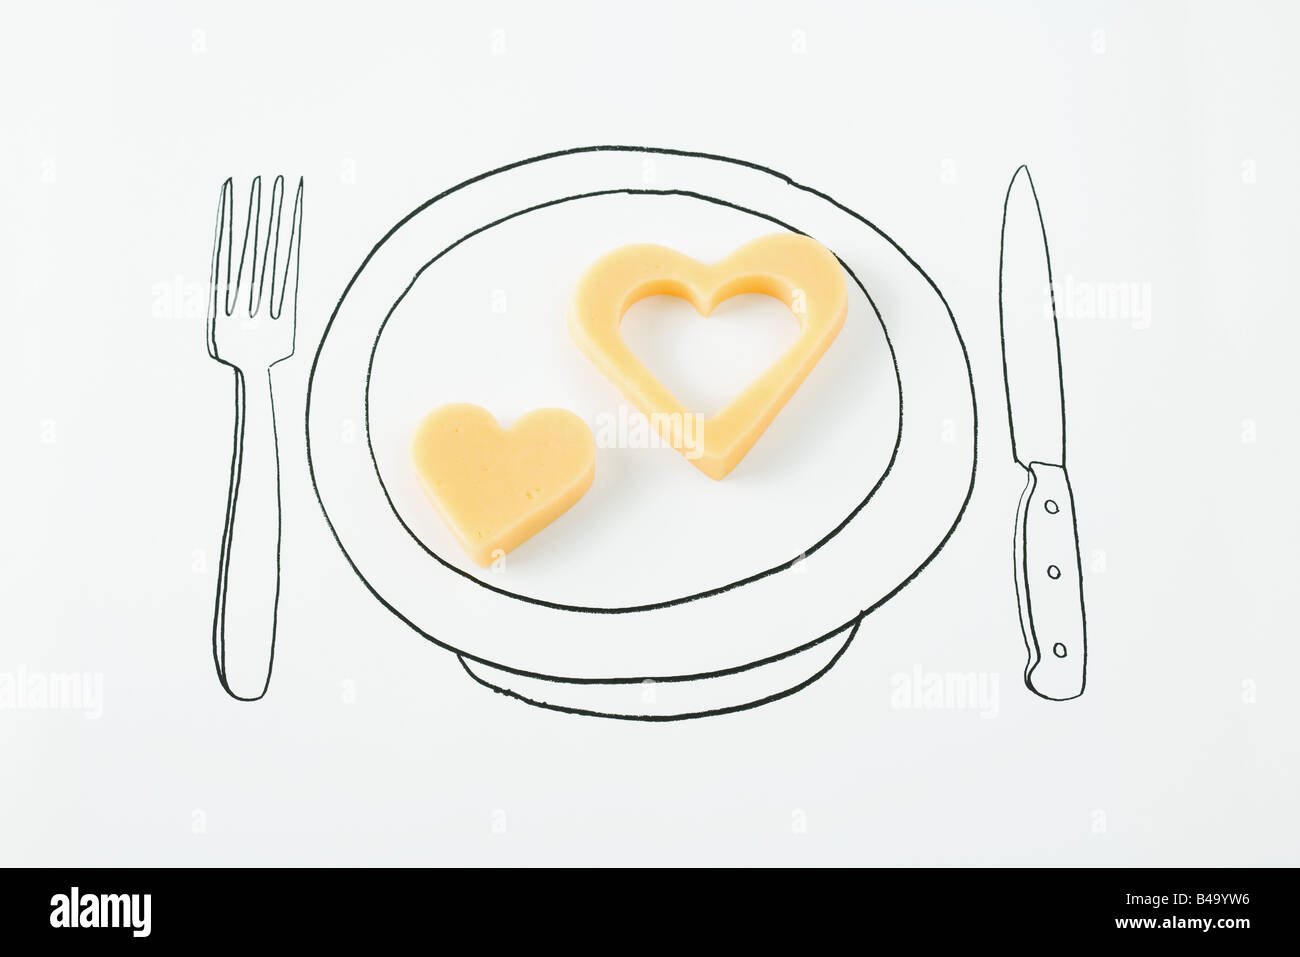 Heart-shaped cheese on drawing of plate Stock Photo